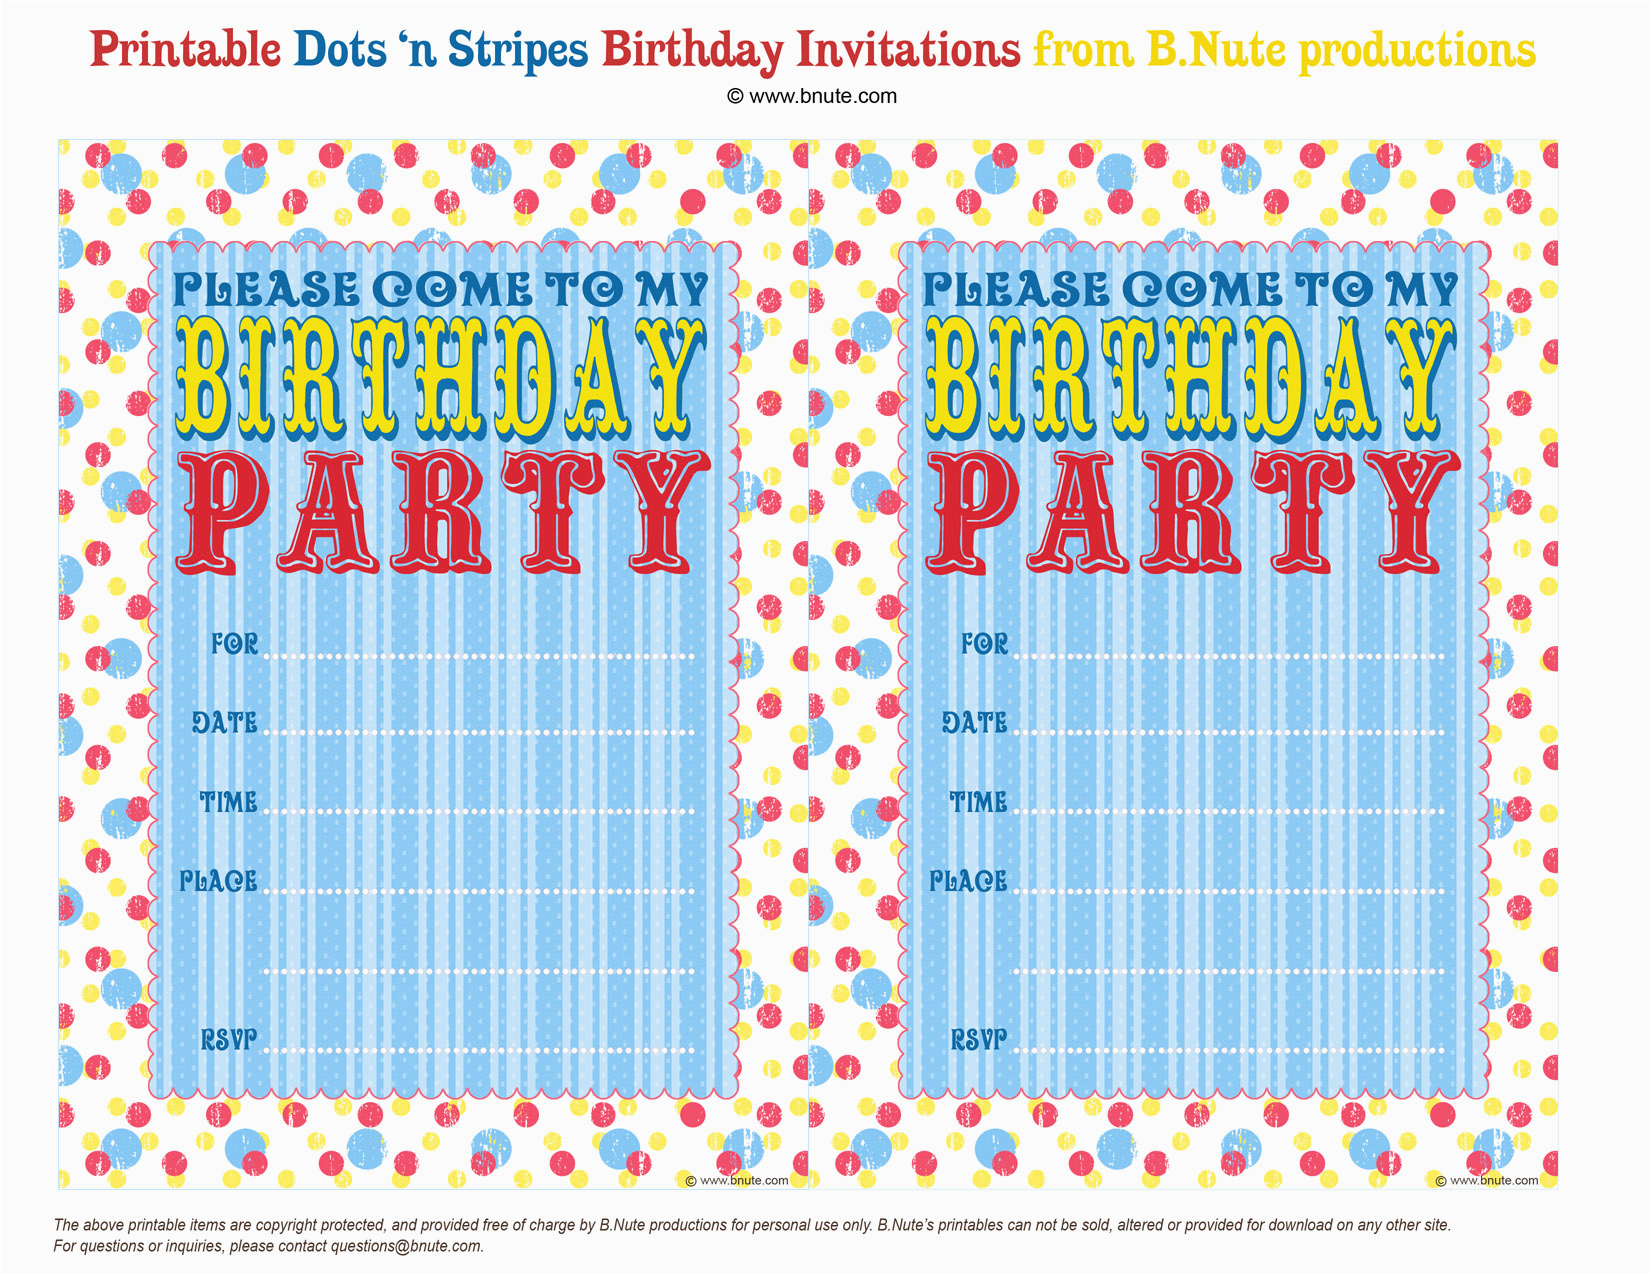 3 outstanding how to fill out a birthday party invitations